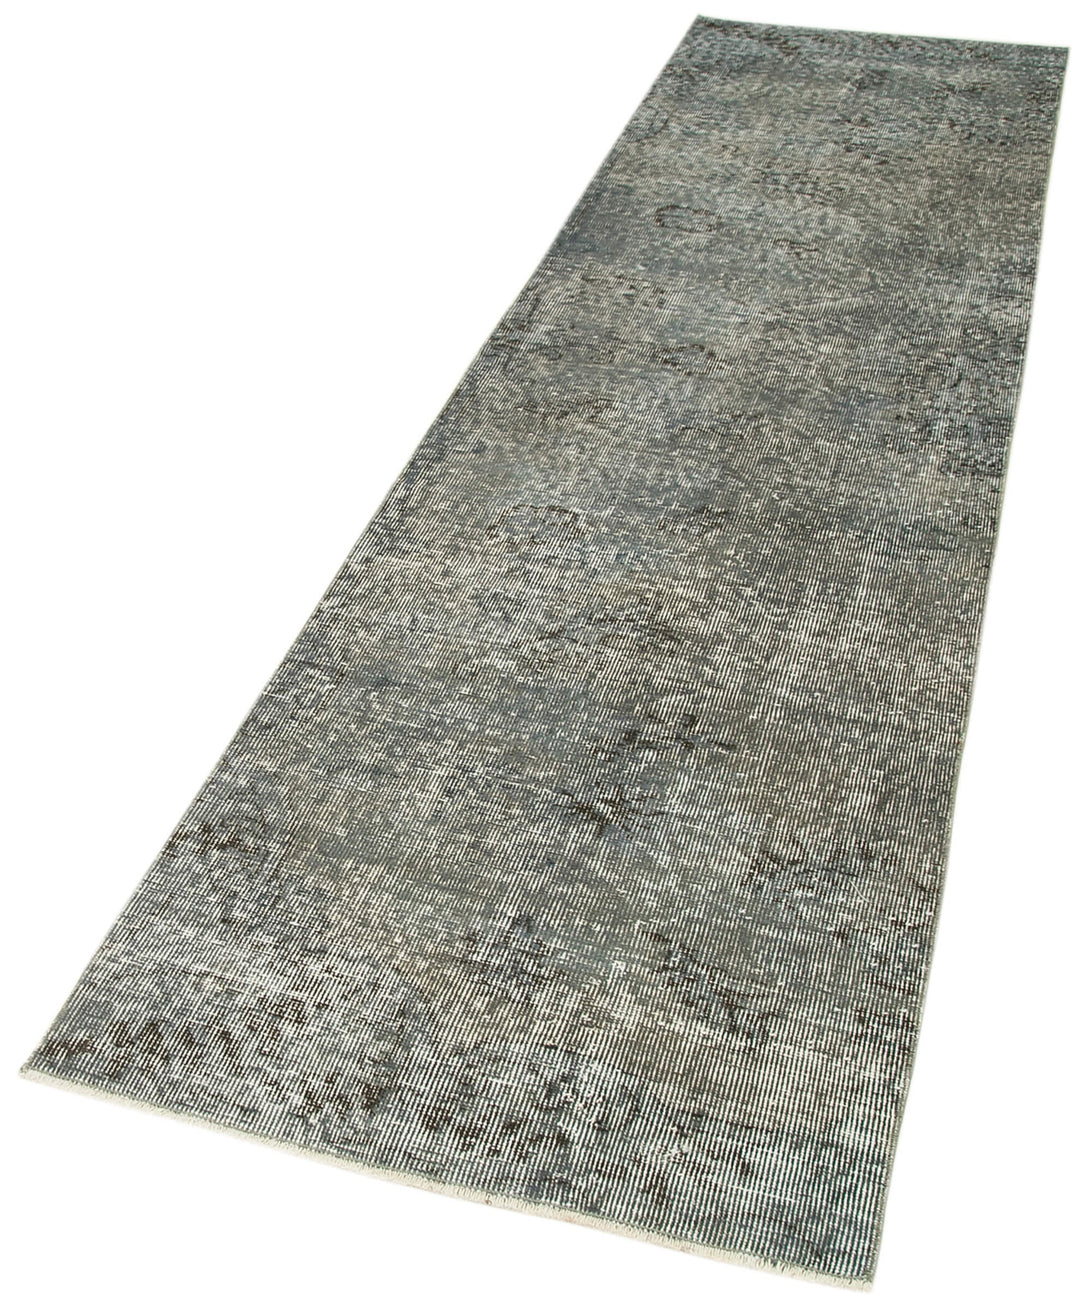 Handmade Overdyed Runner > Design# OL-AC-38120 > Size: 2'-7" x 10'-0", Carpet Culture Rugs, Handmade Rugs, NYC Rugs, New Rugs, Shop Rugs, Rug Store, Outlet Rugs, SoHo Rugs, Rugs in USA